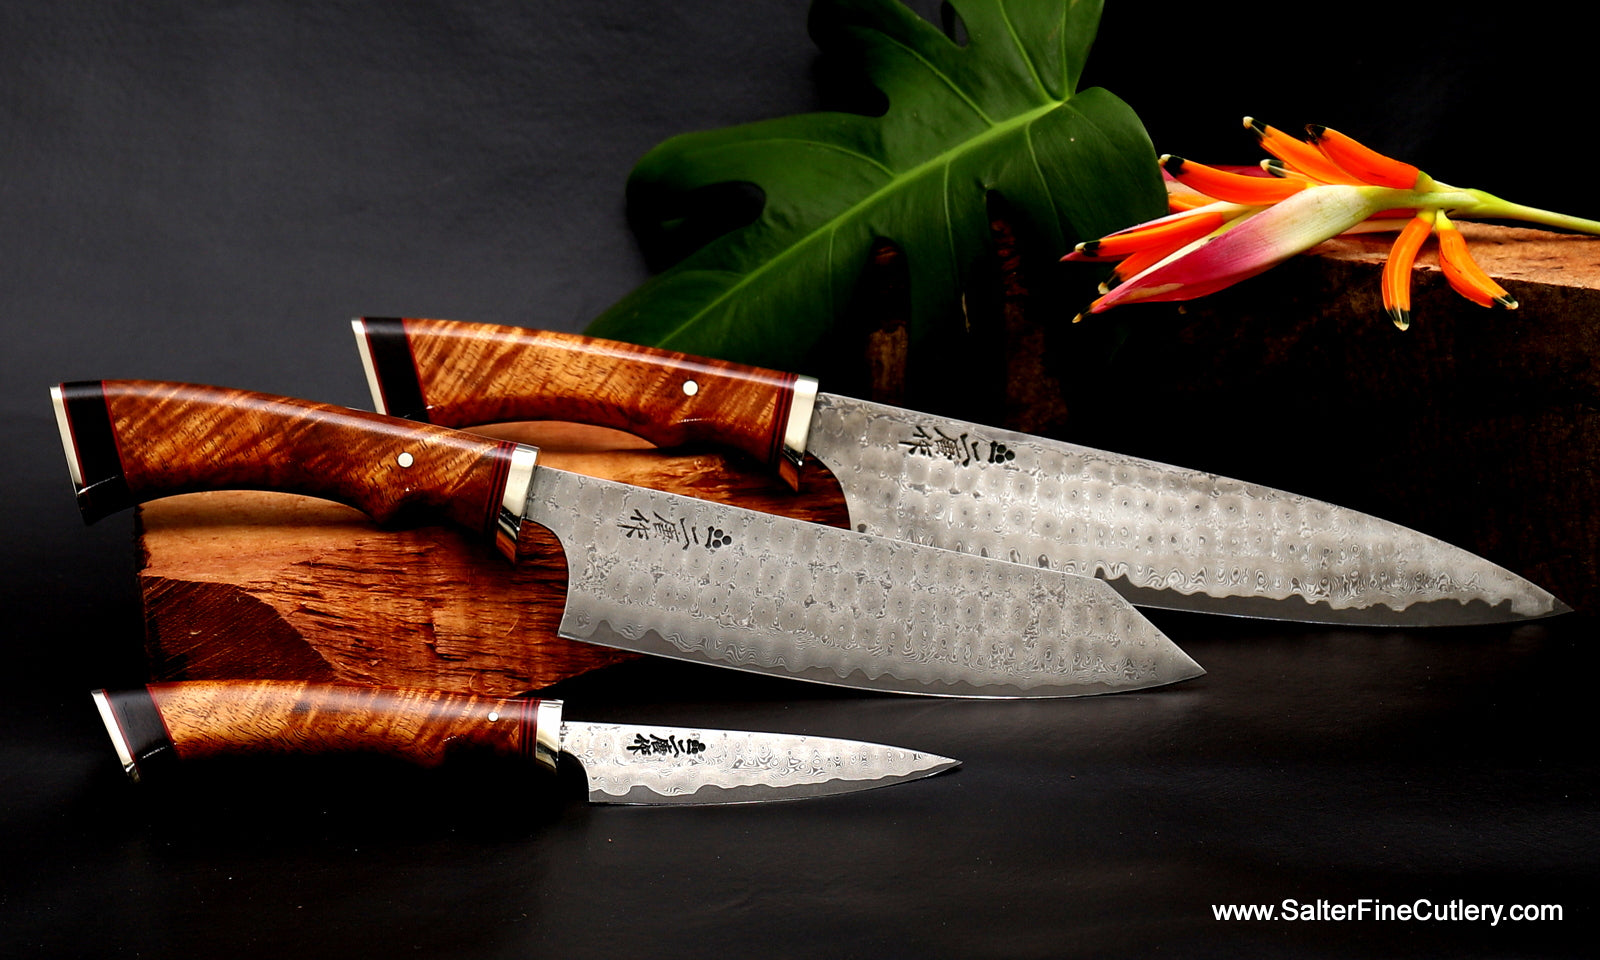 https://cdn.shopify.com/s/files/1/0993/8330/files/Chef_Knife_Set_3-pc_N-Series_part_of_Mottola_9-pc_set_by_Salter_Fine_Cutlery.jpg?v=1600465703